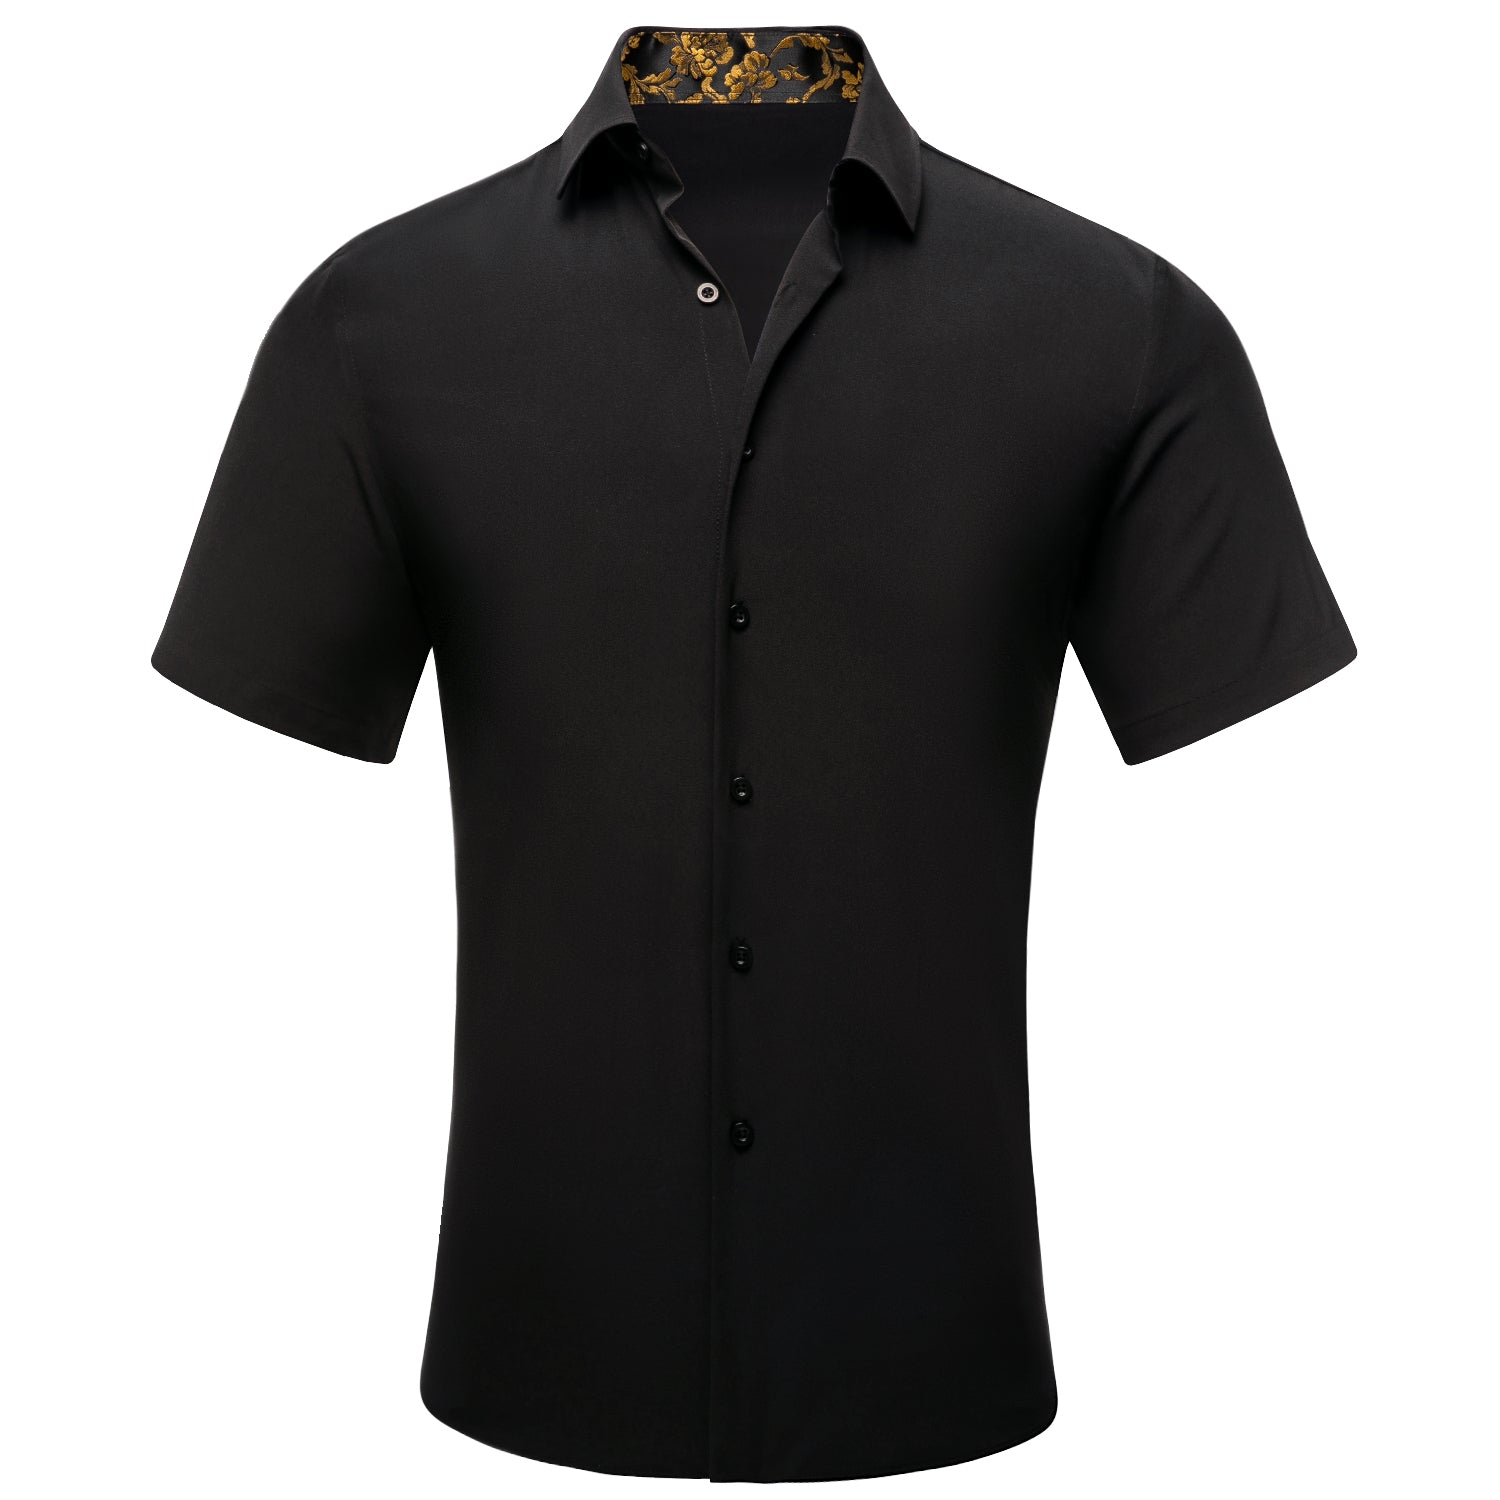 Black Solid with Gold Floral Collar Silk Men's Short Sleeve Shirt